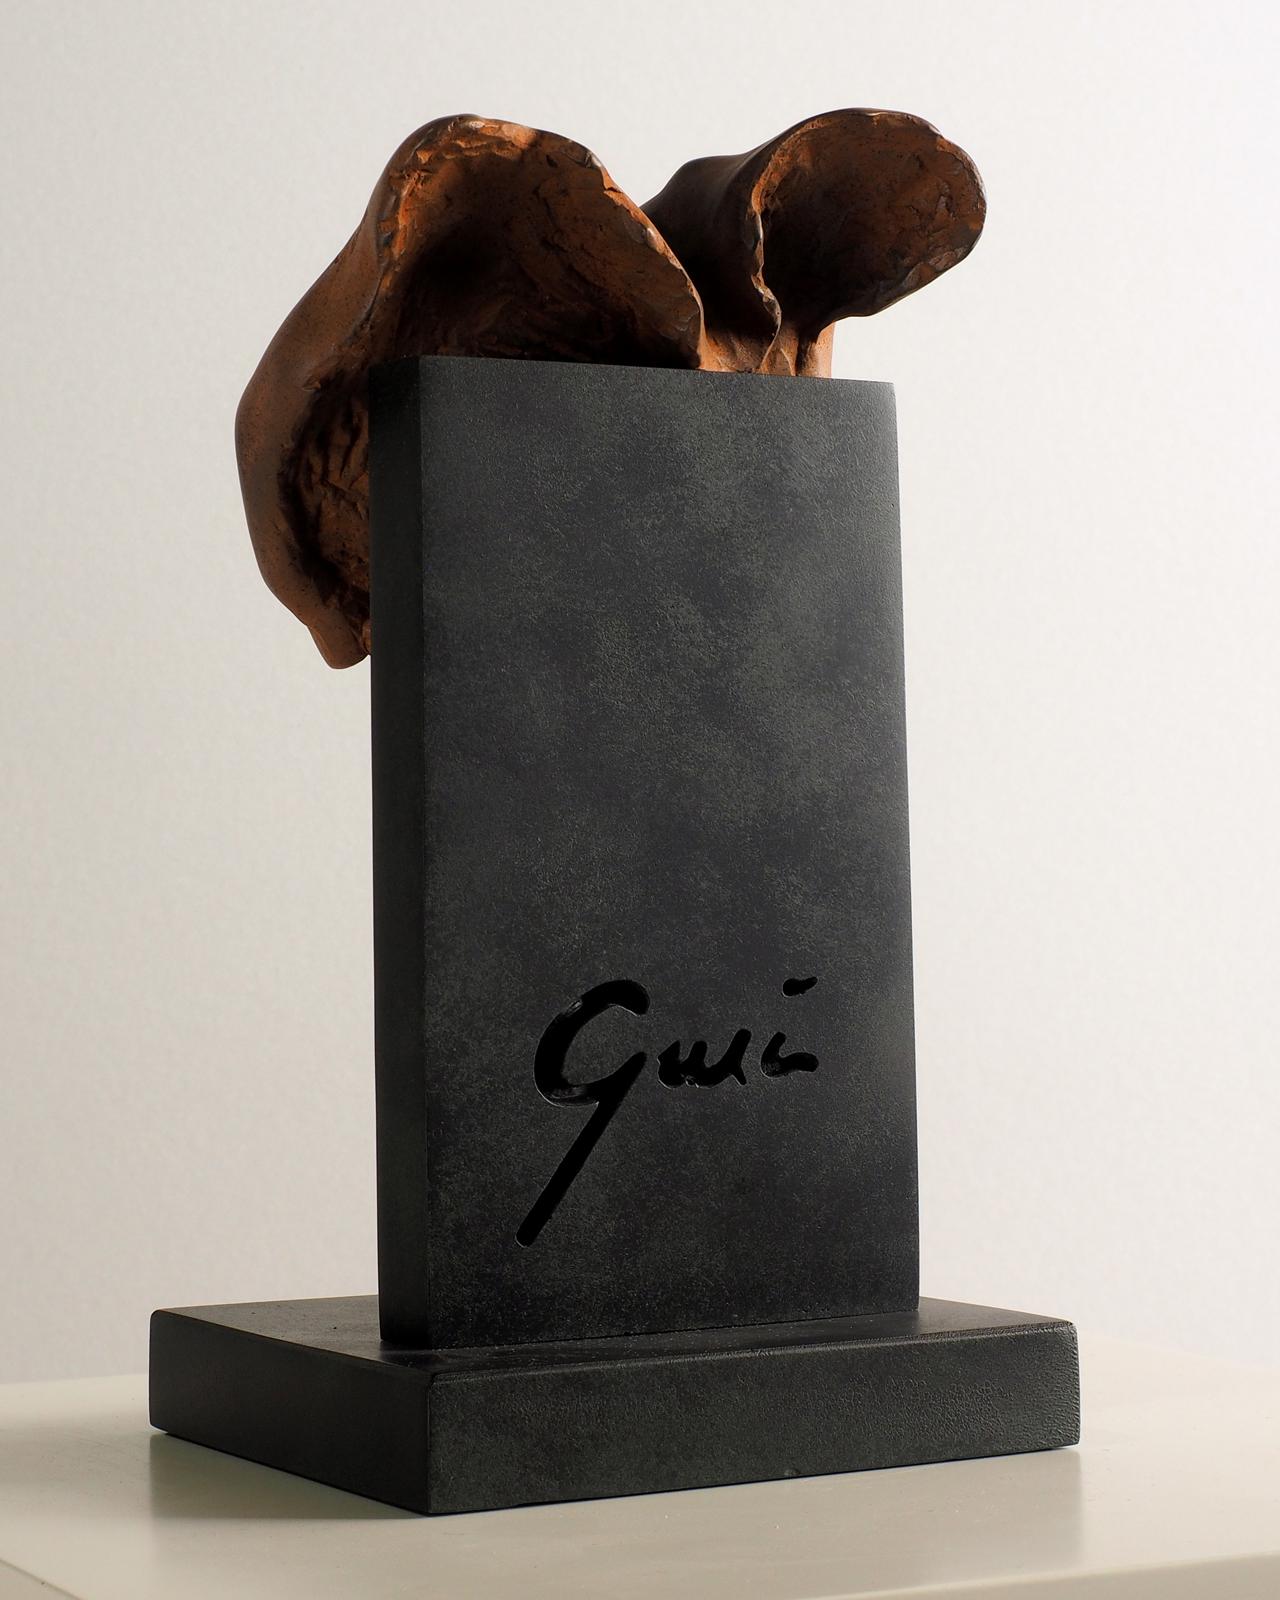 Do you feel the same? - Miguel Guía Realist Bronze layer Sculpture Figurative  For Sale 3